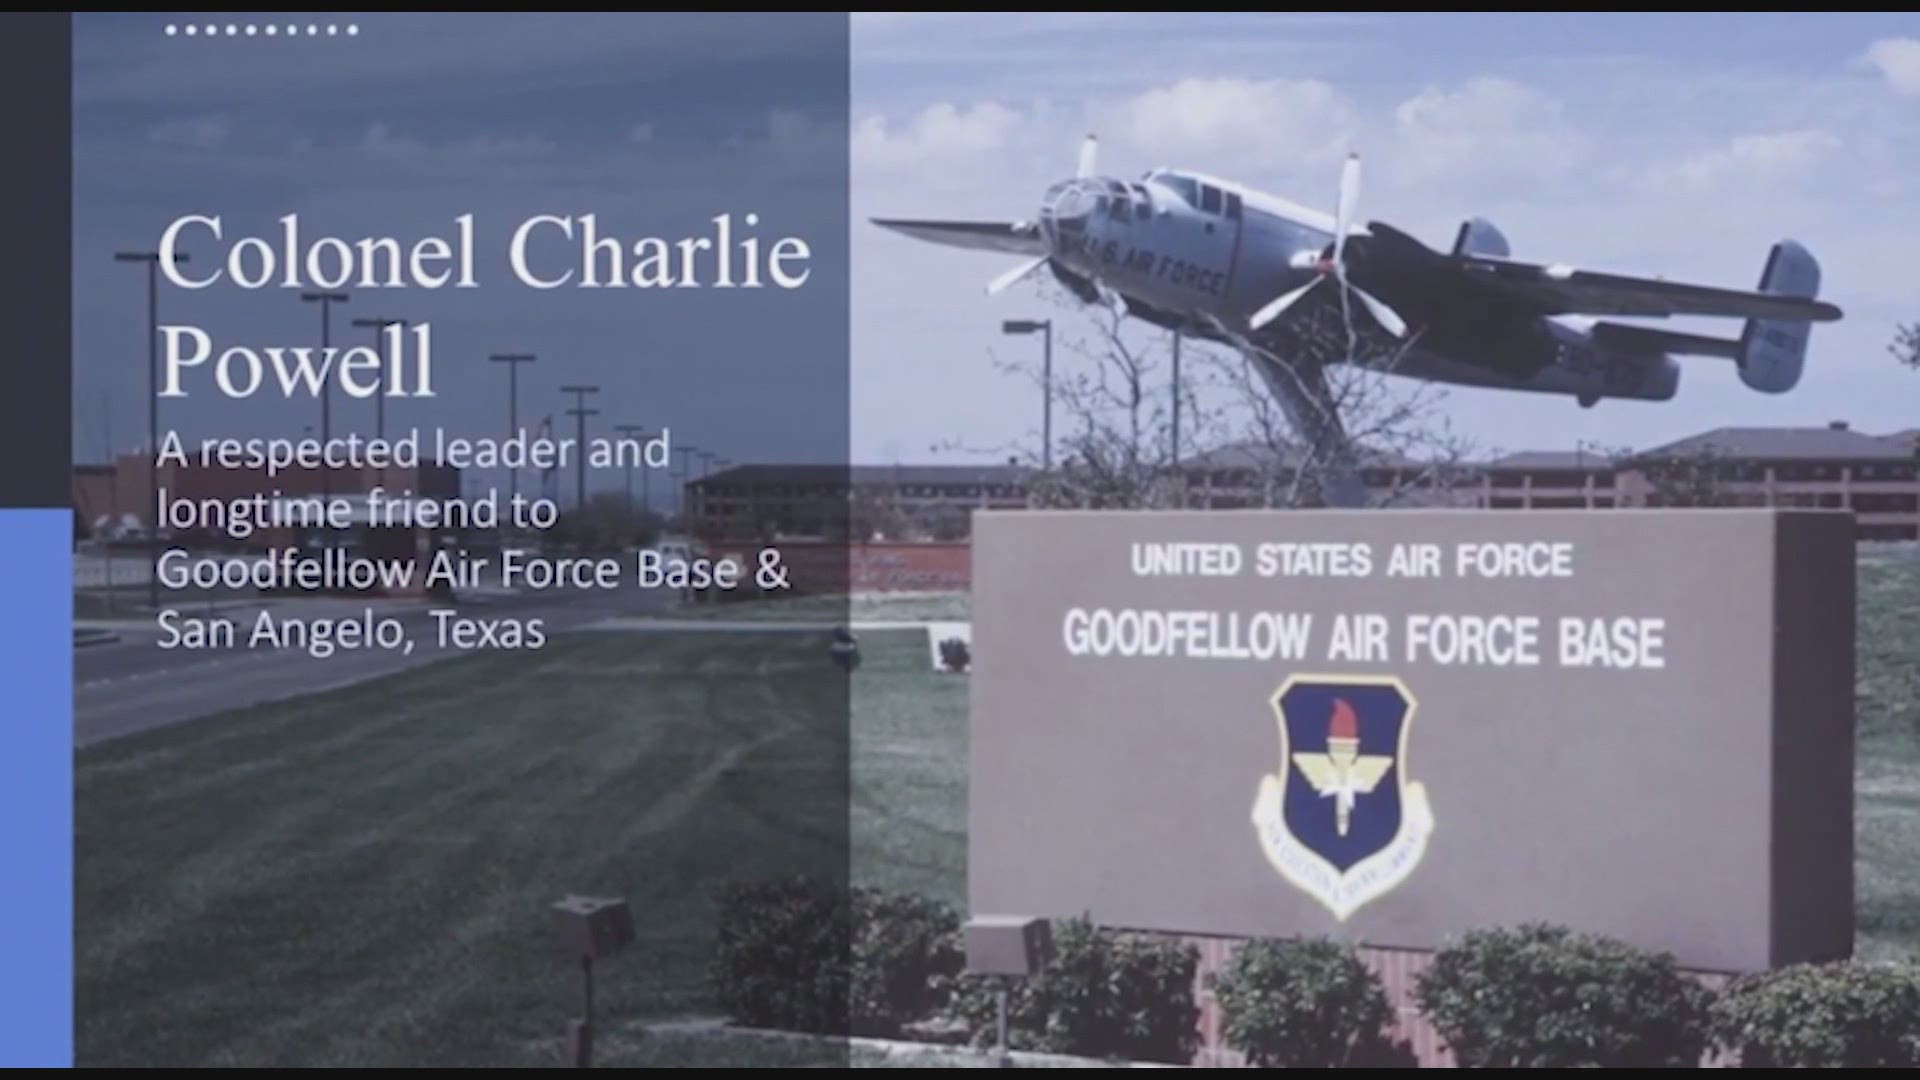 Col. Charles Powell, 89, had died, but his impact continues to live on through his community and his family.